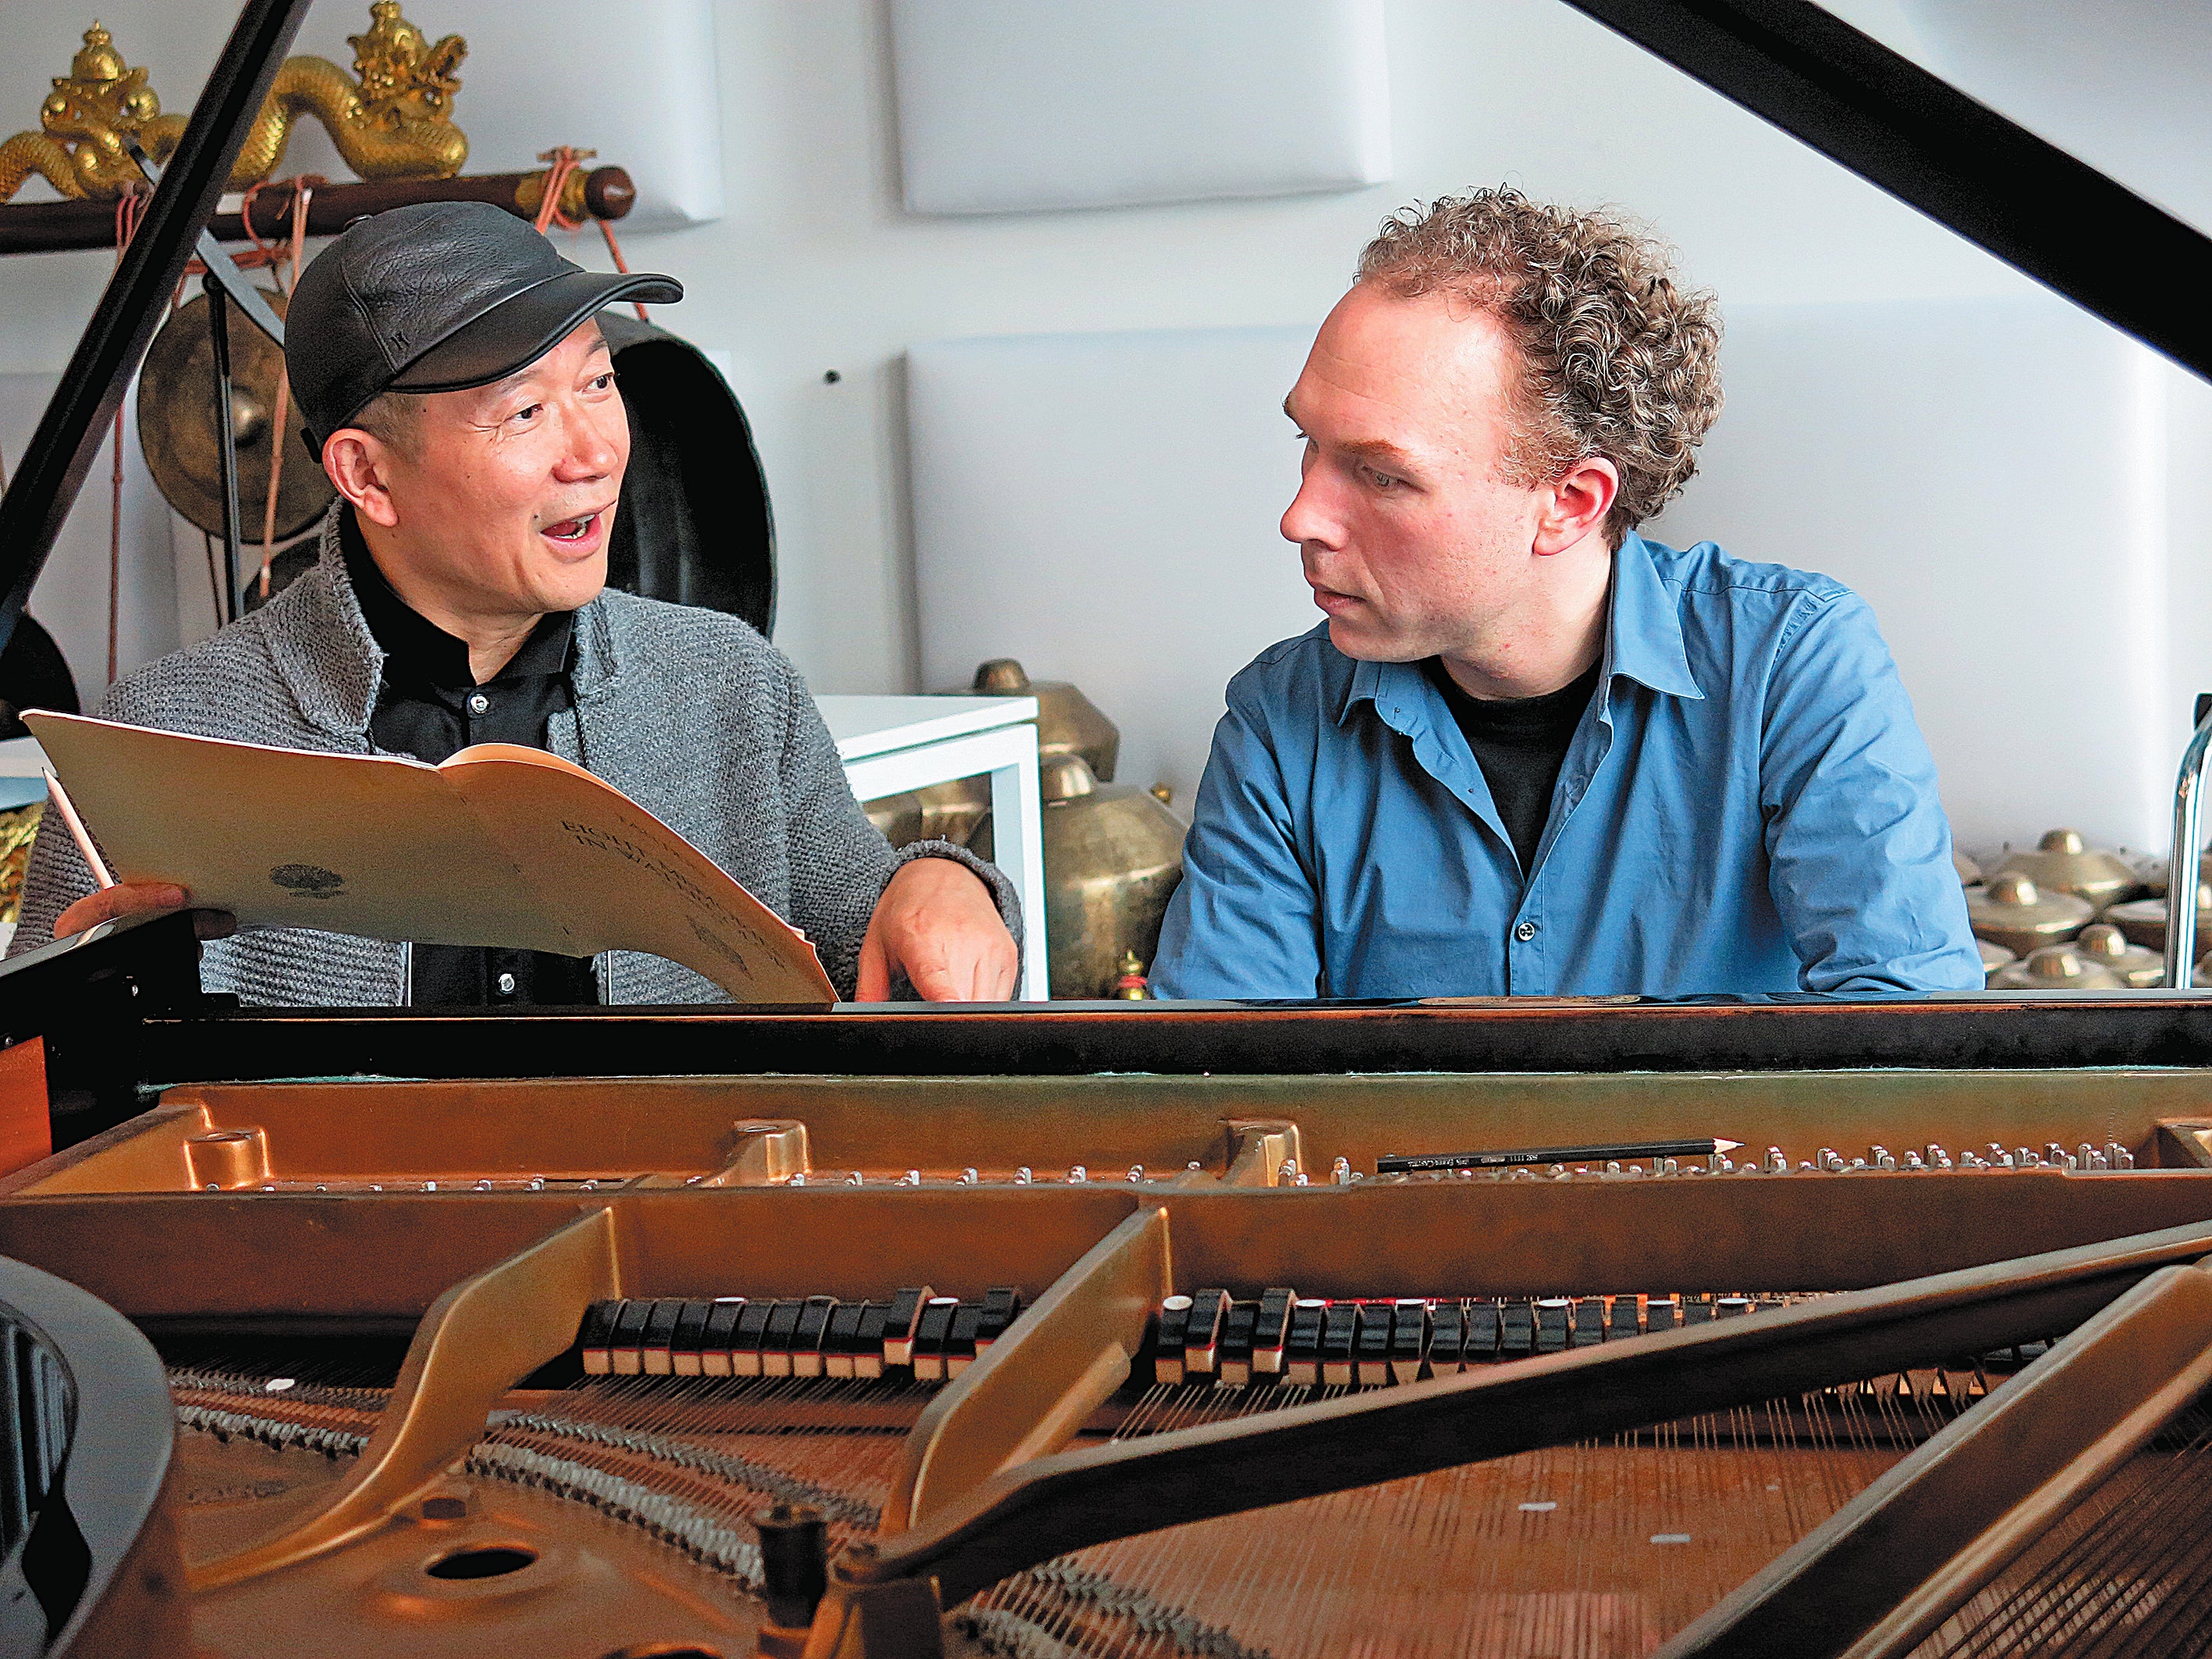 Tan Dun (left) released the new album Eight Memories in Watercolour , featuring his piano music performed by the Dutch pianist Ralph van Raat